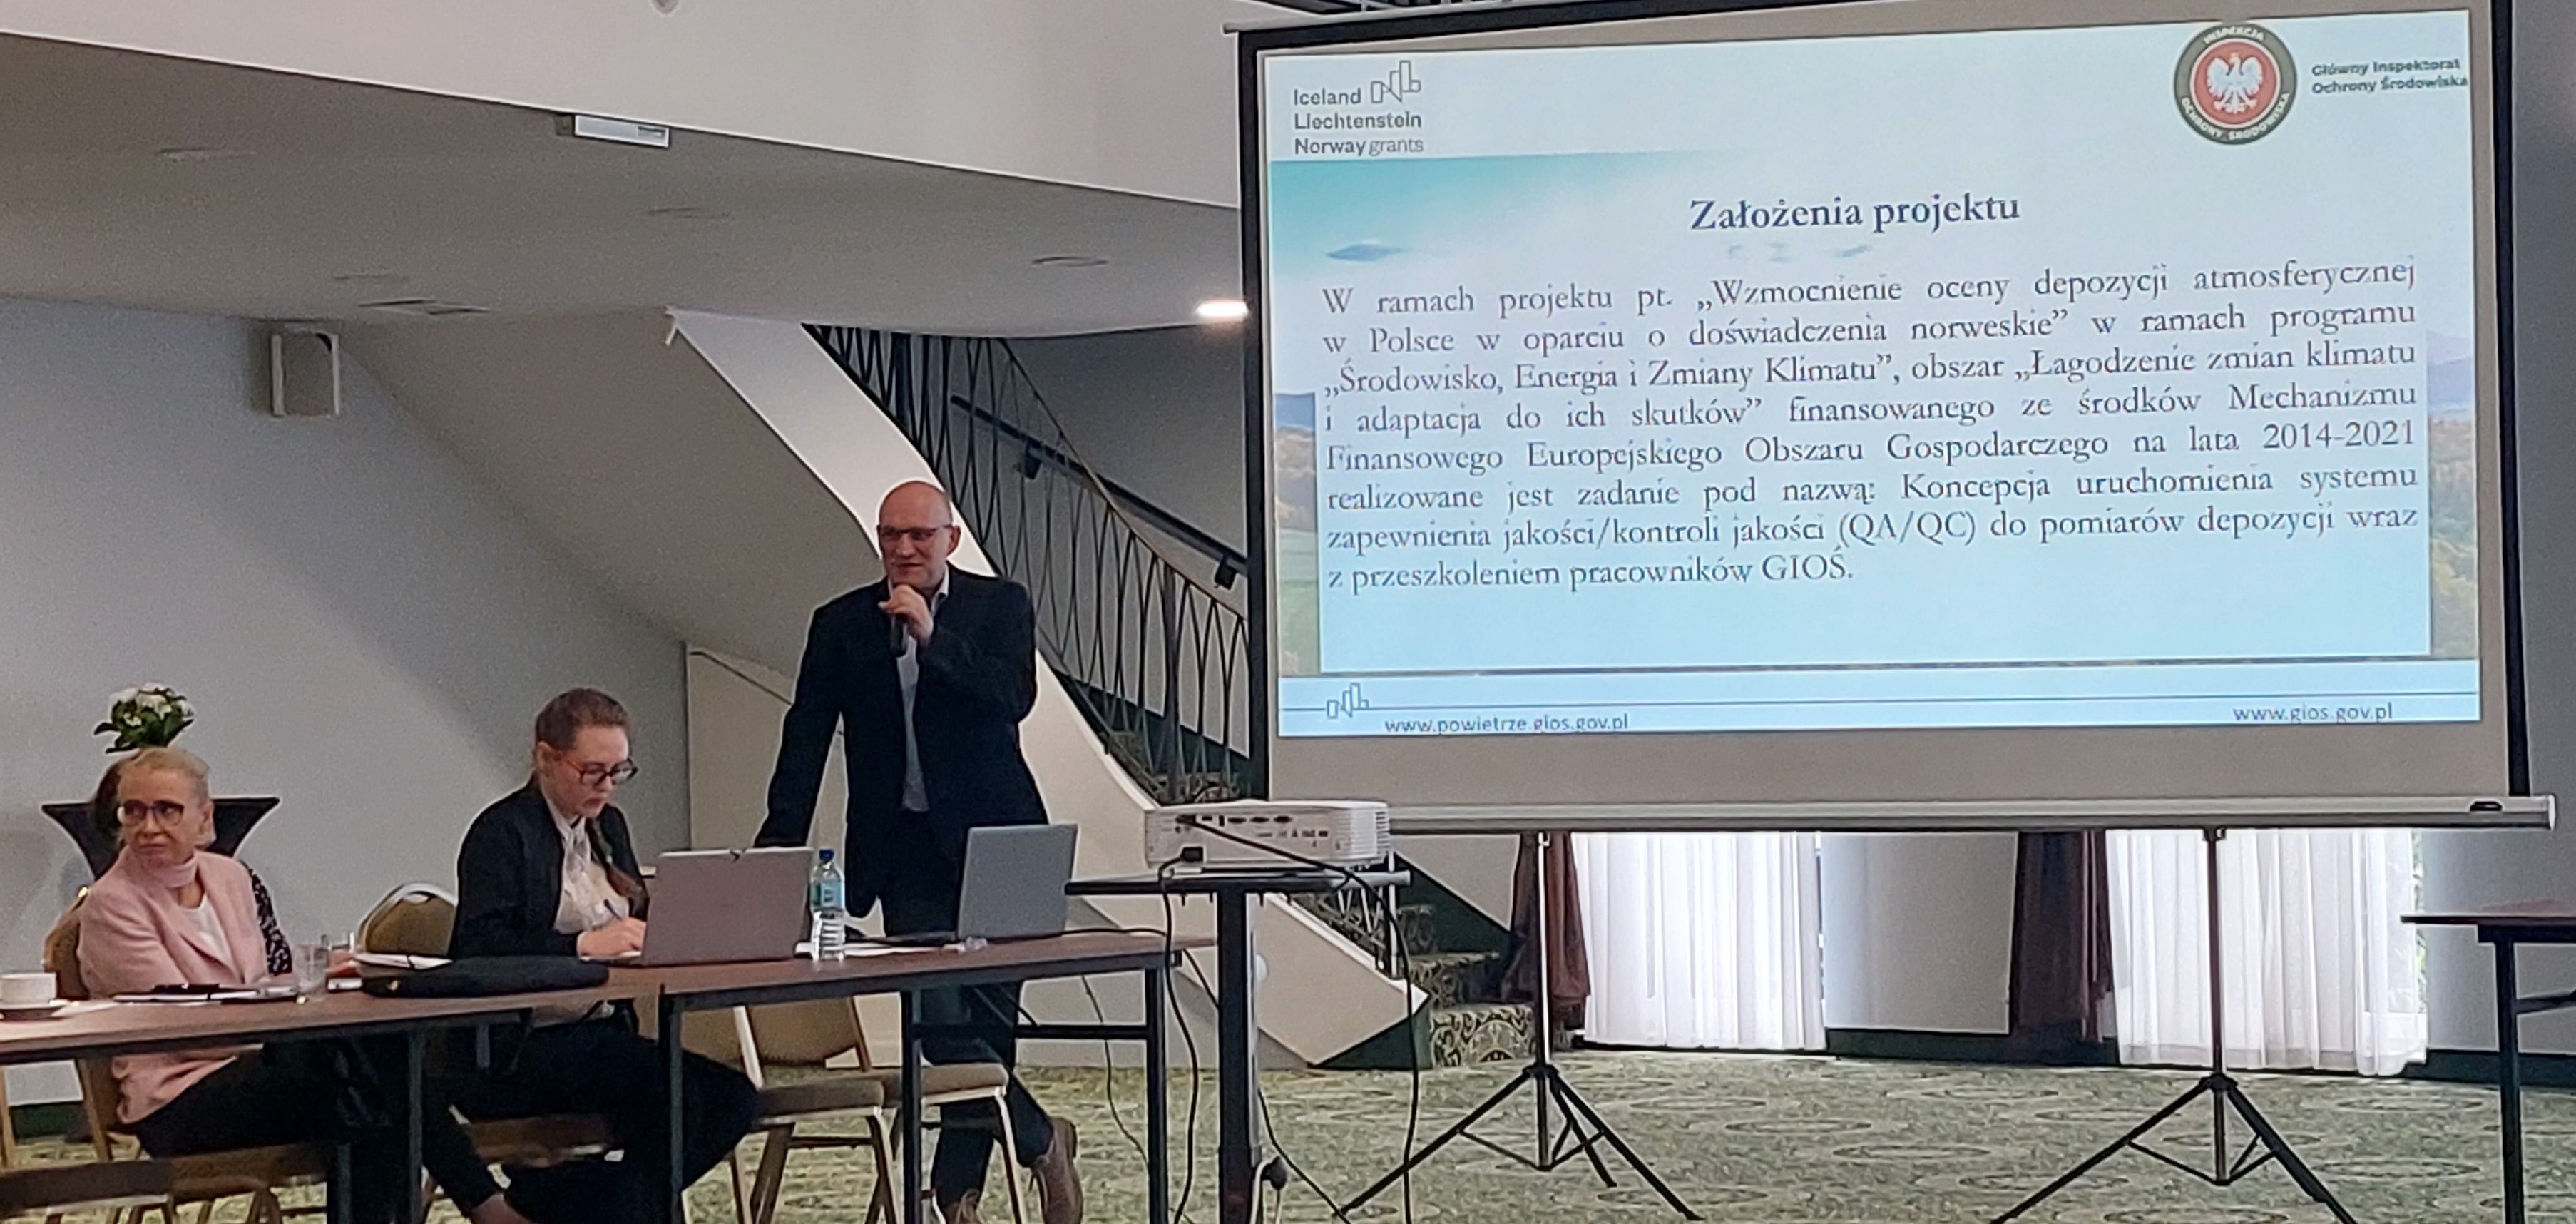 Tomasz Frączkowski, Head of the National Reference Laboratory for Air Quality, presenting the project assumptions